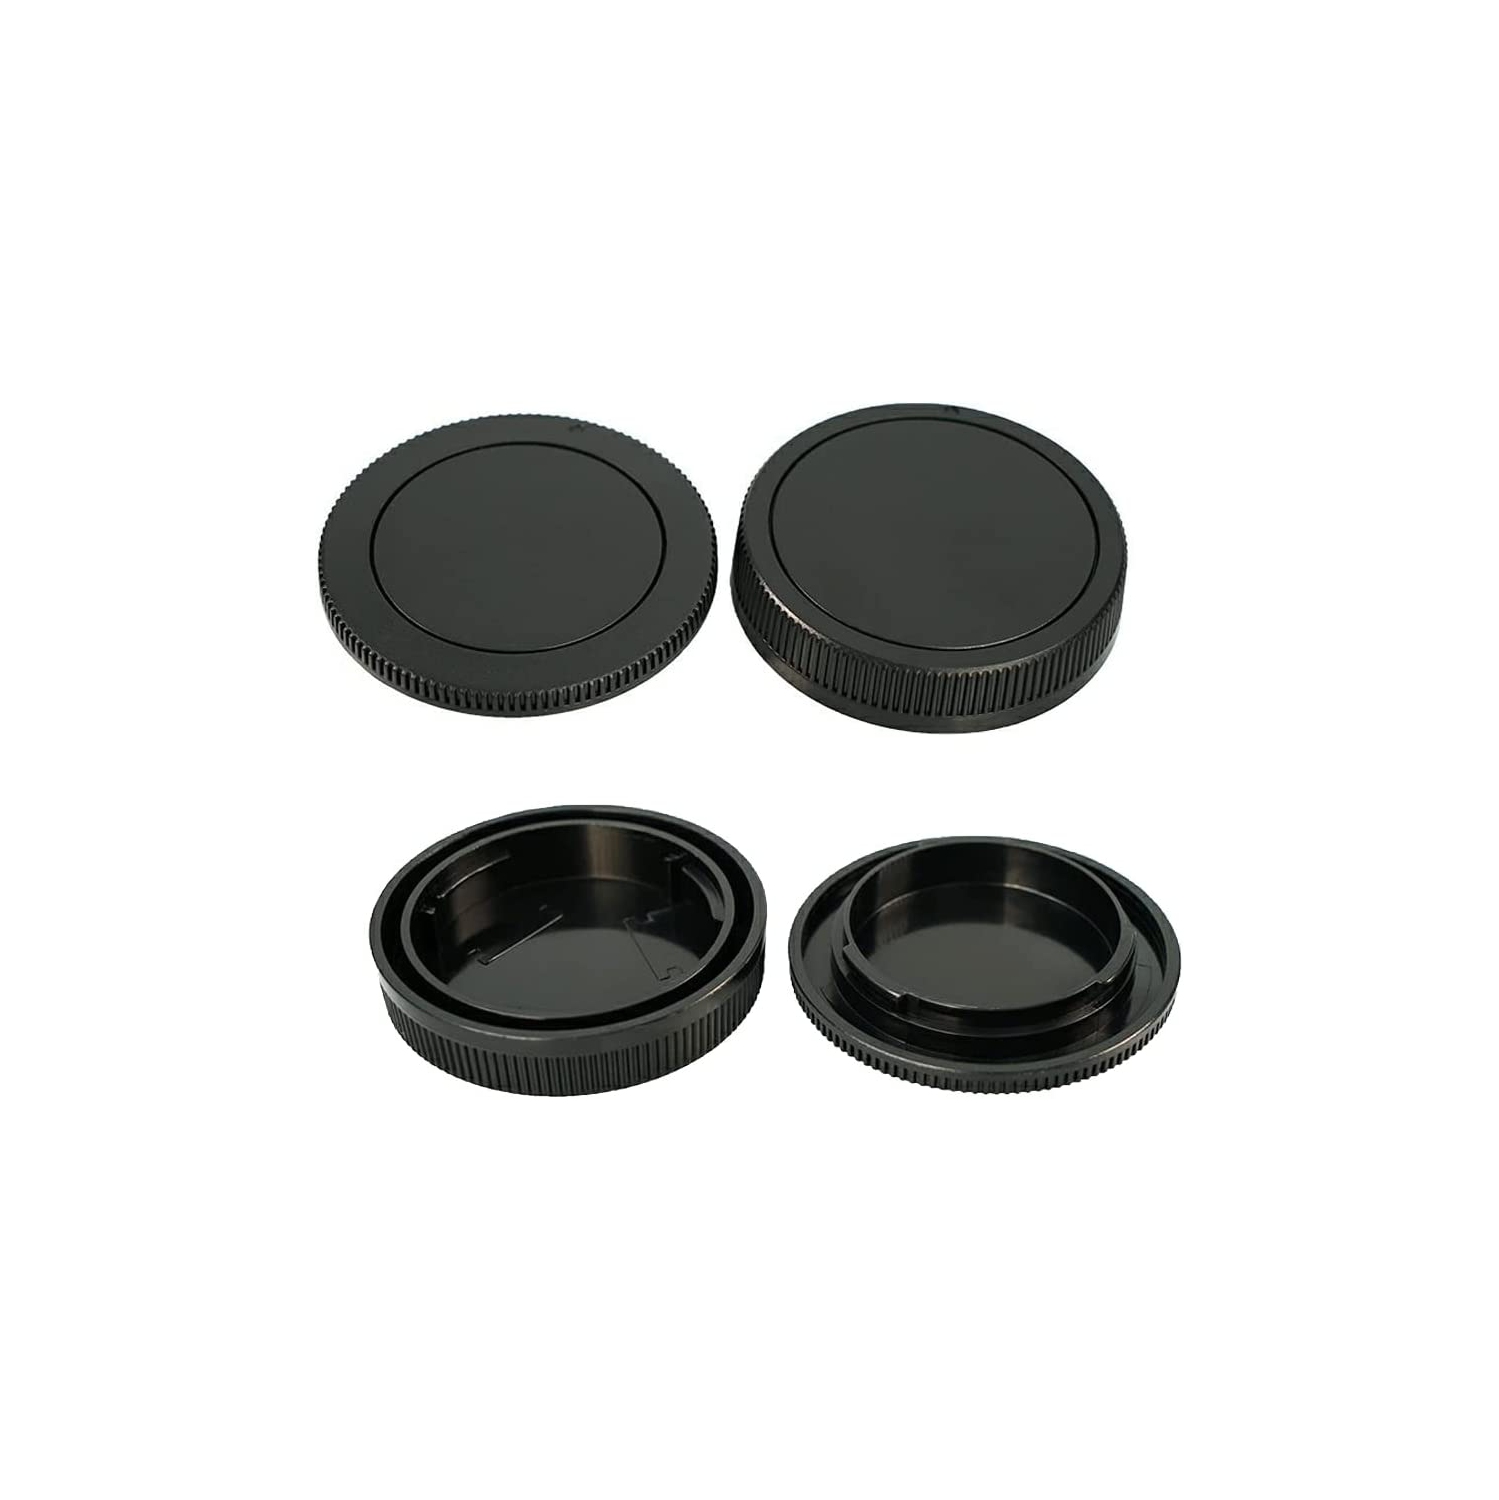 Camera Body Cap & Rear Lens Cover for Compatible for Canon EOS M50II M50 M100 M3 M5 Camera kit EF-M Mount Lens (2 Pack)